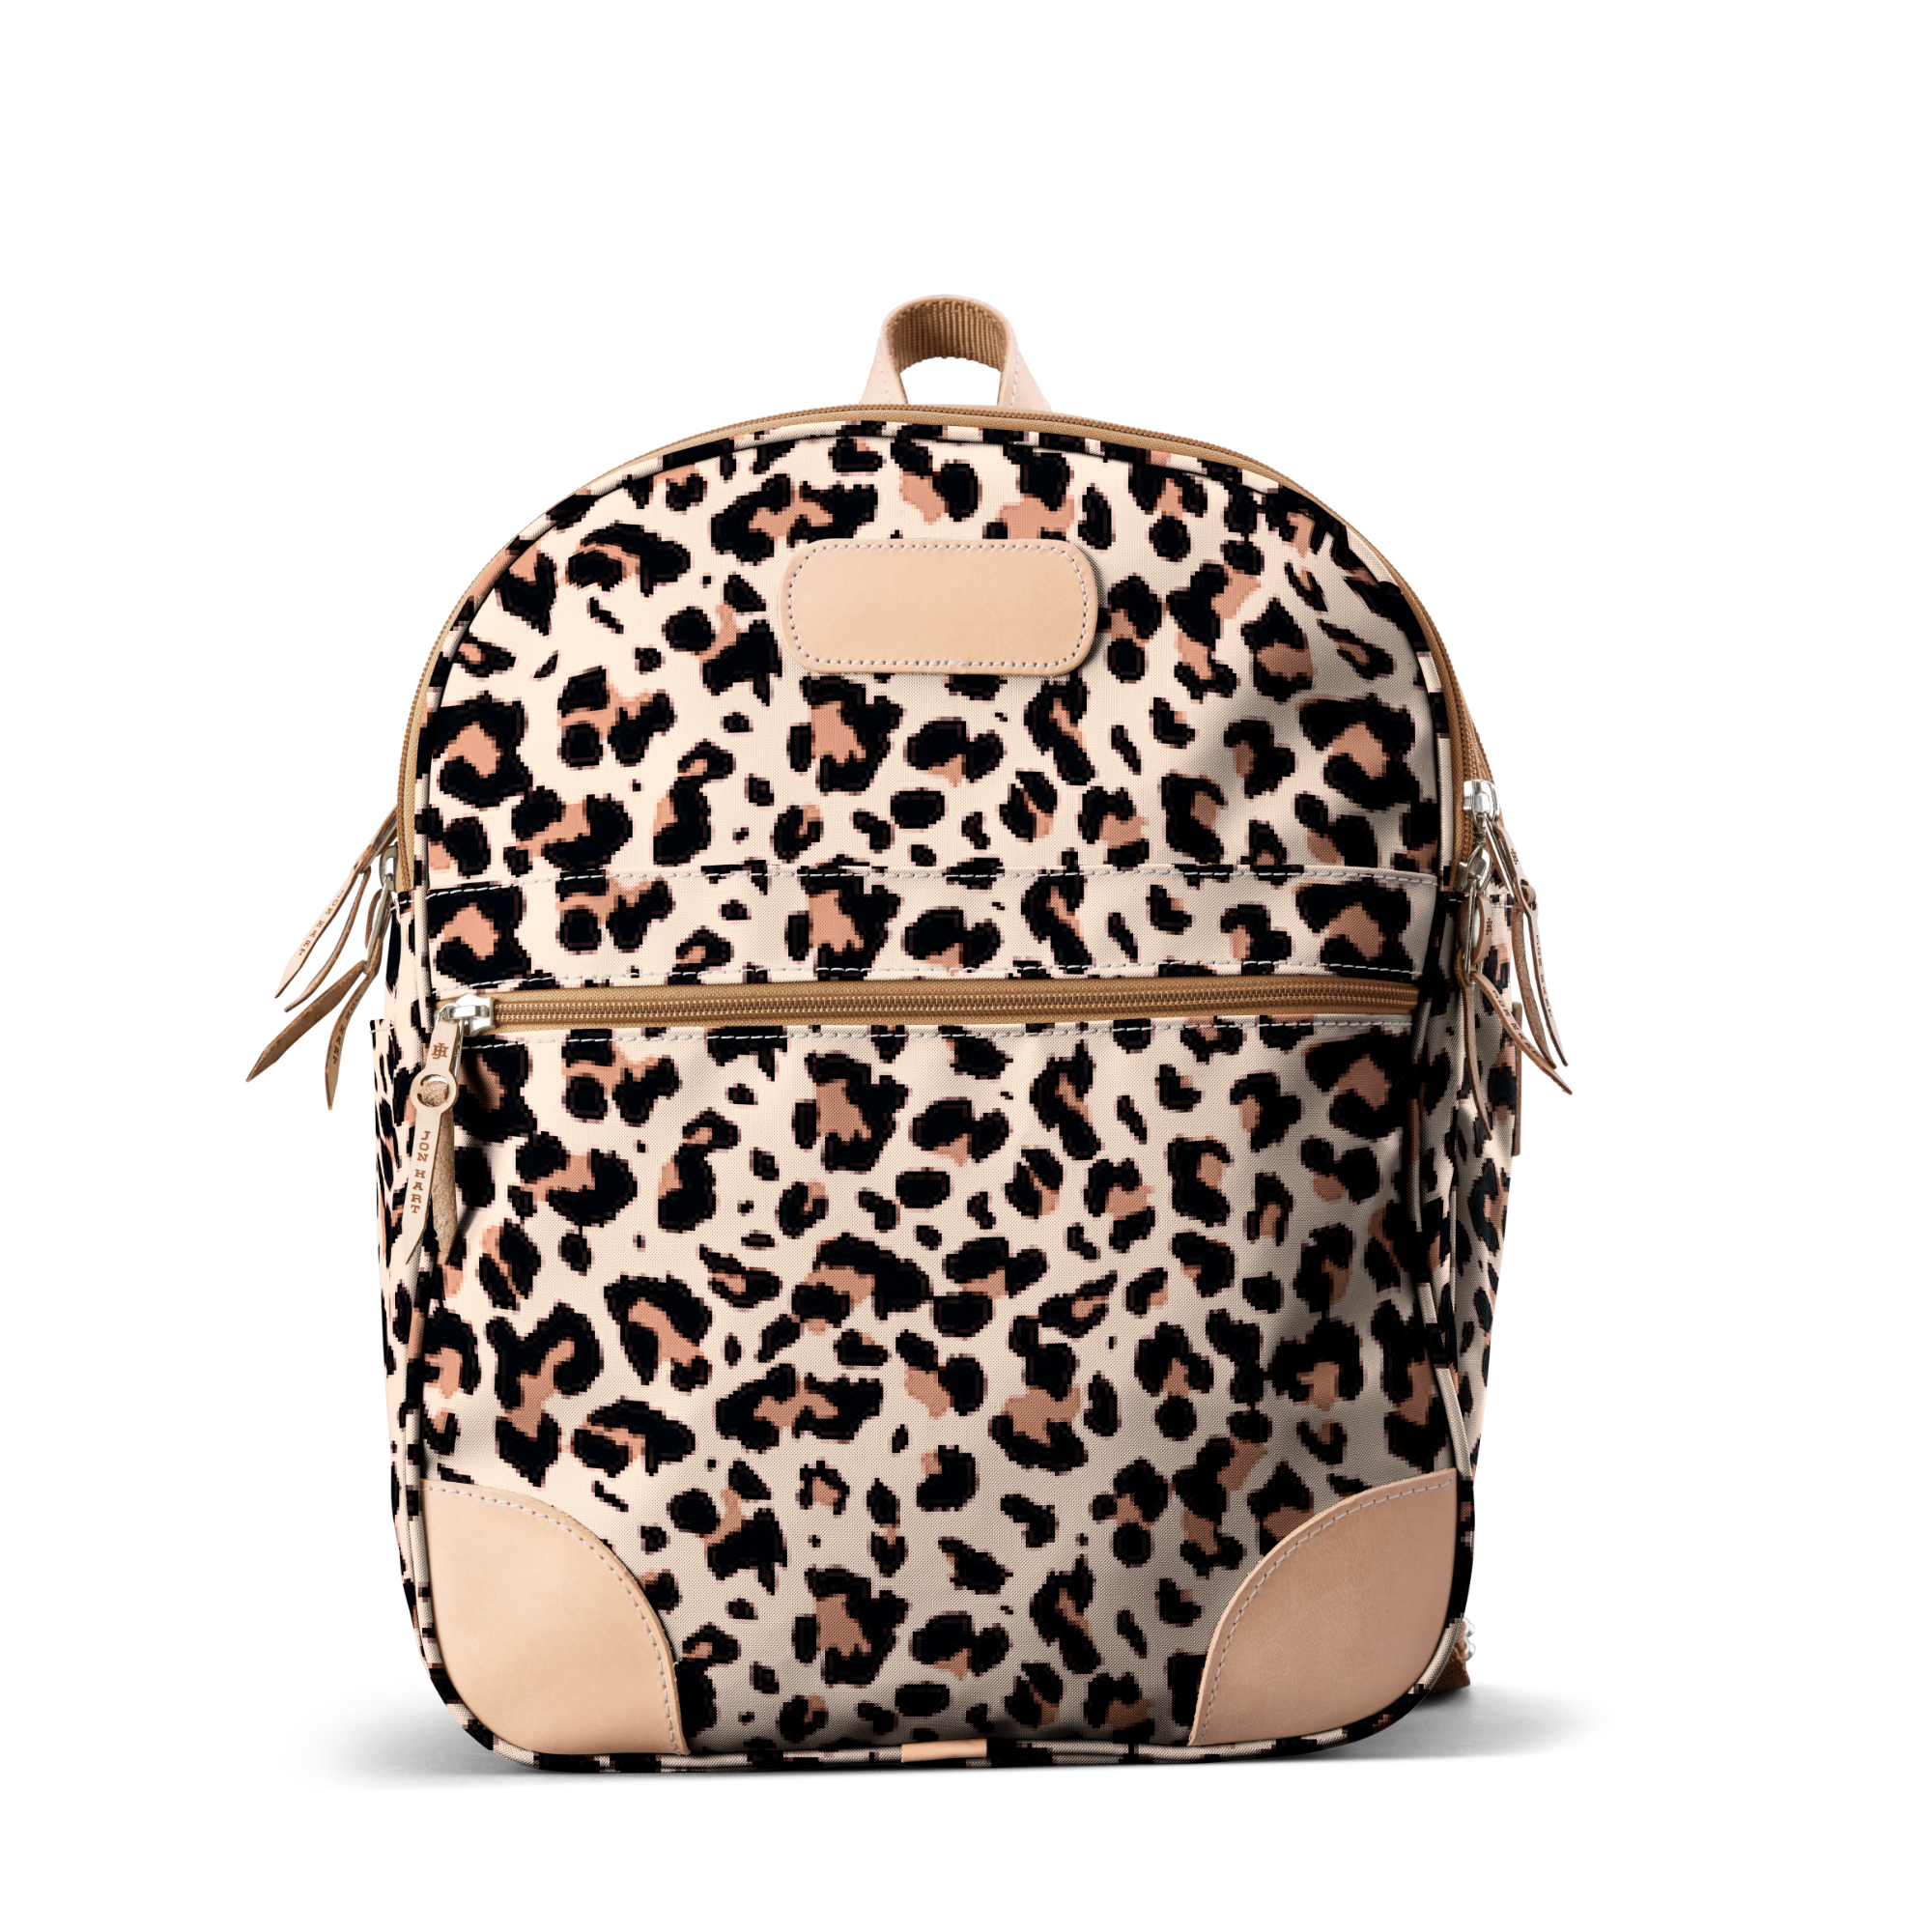 RED(V) Printed shell backpack, Sale up to 70% off